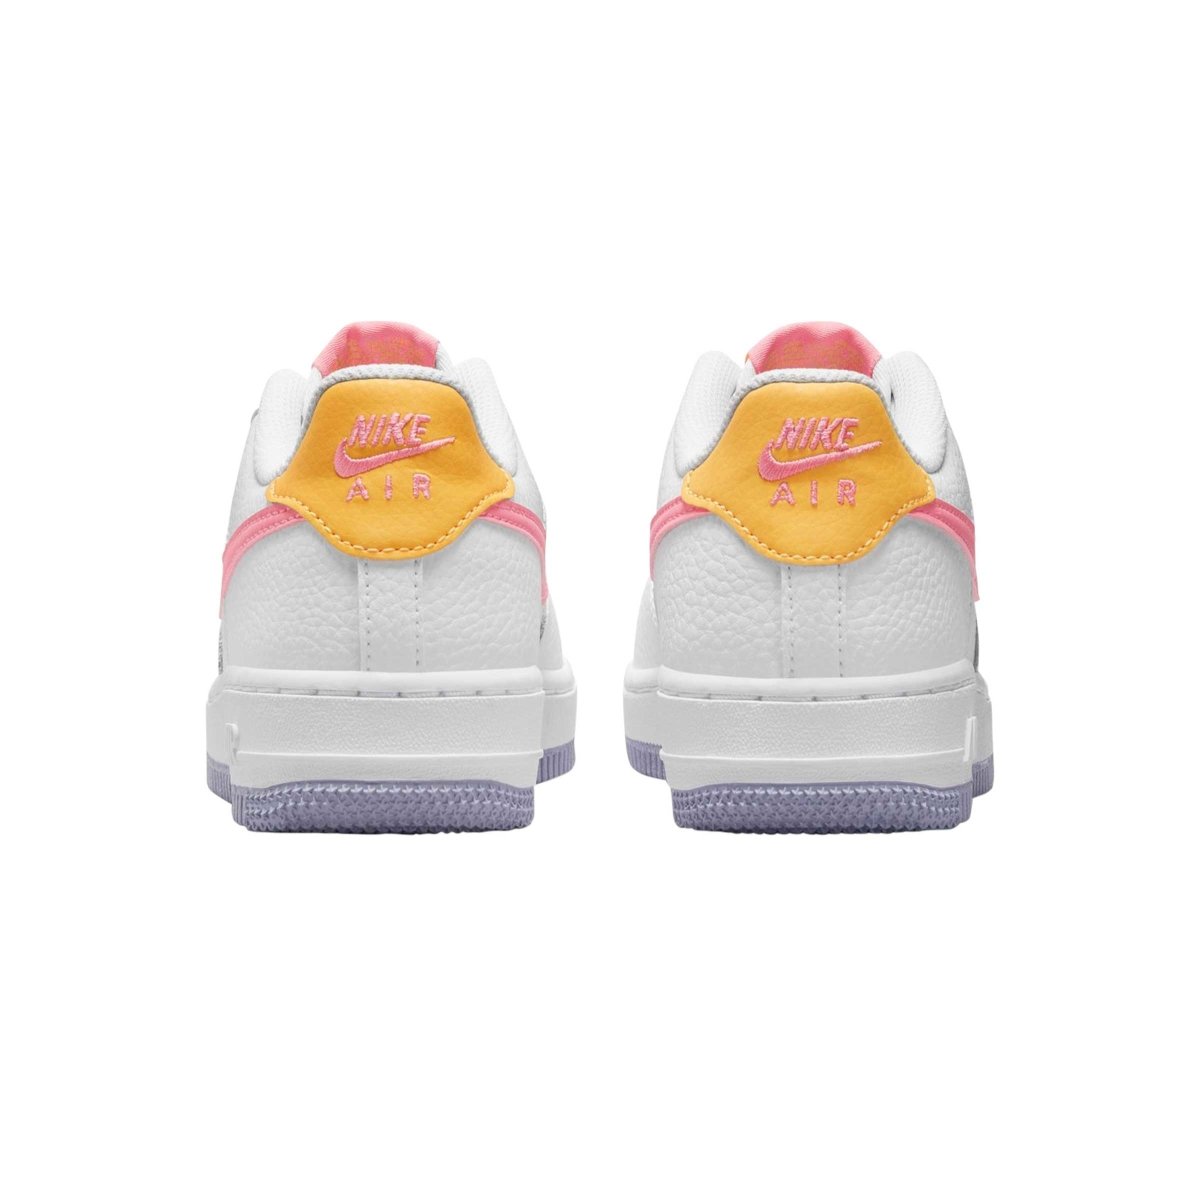 Nike GS (Grade School) Air Force 1 White/Coral - 10030417 - West NYC